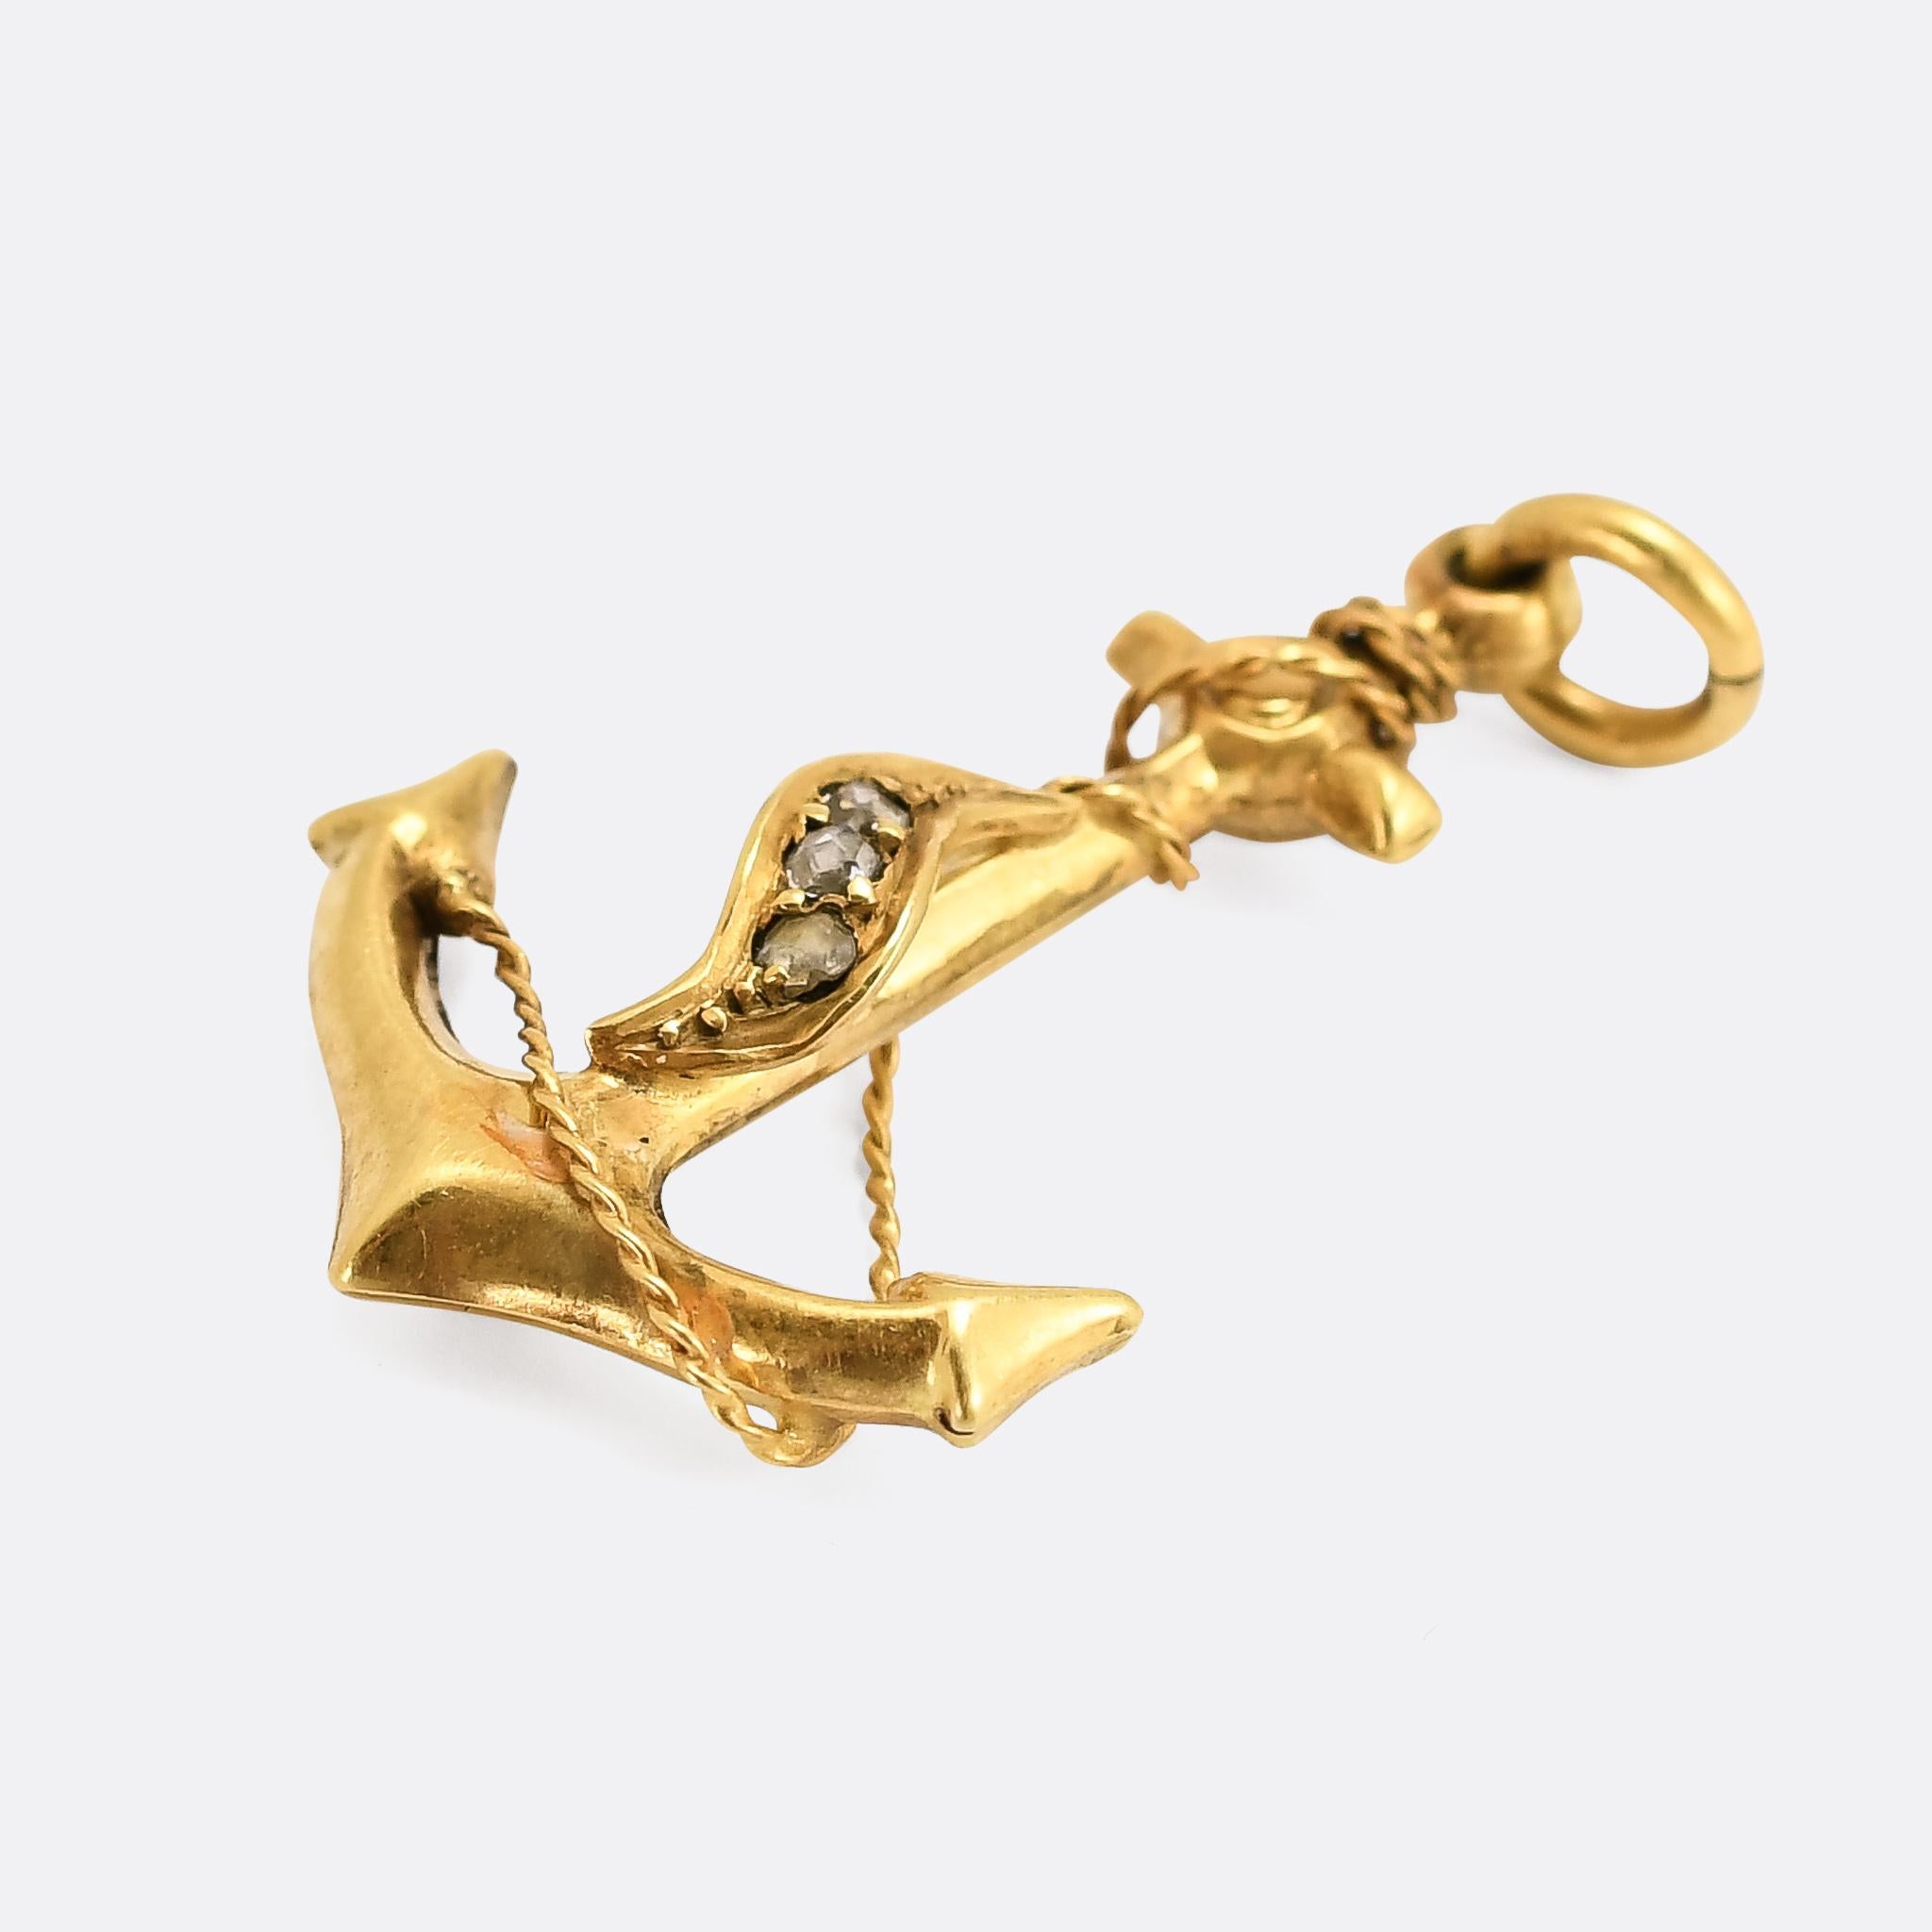 A talisman of enduring hope. This Victorian anchor pendant was made in the late 19th century. The world was a very different place, but its message remains true: diamonds for endurance, an anchor as a symbol of hope. The craftsmanship is